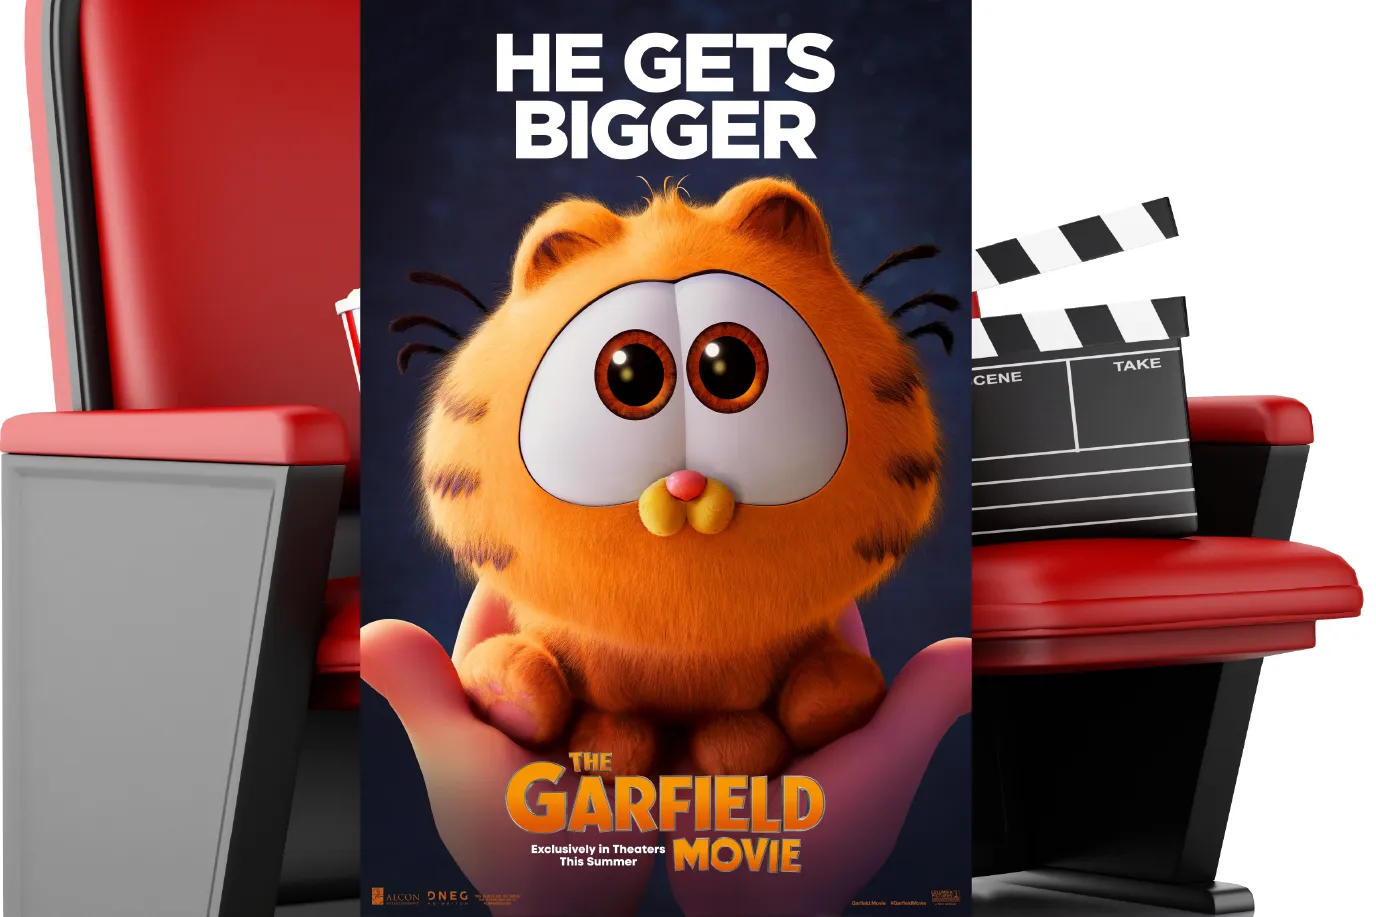 Movie poster for The Garfield Movie